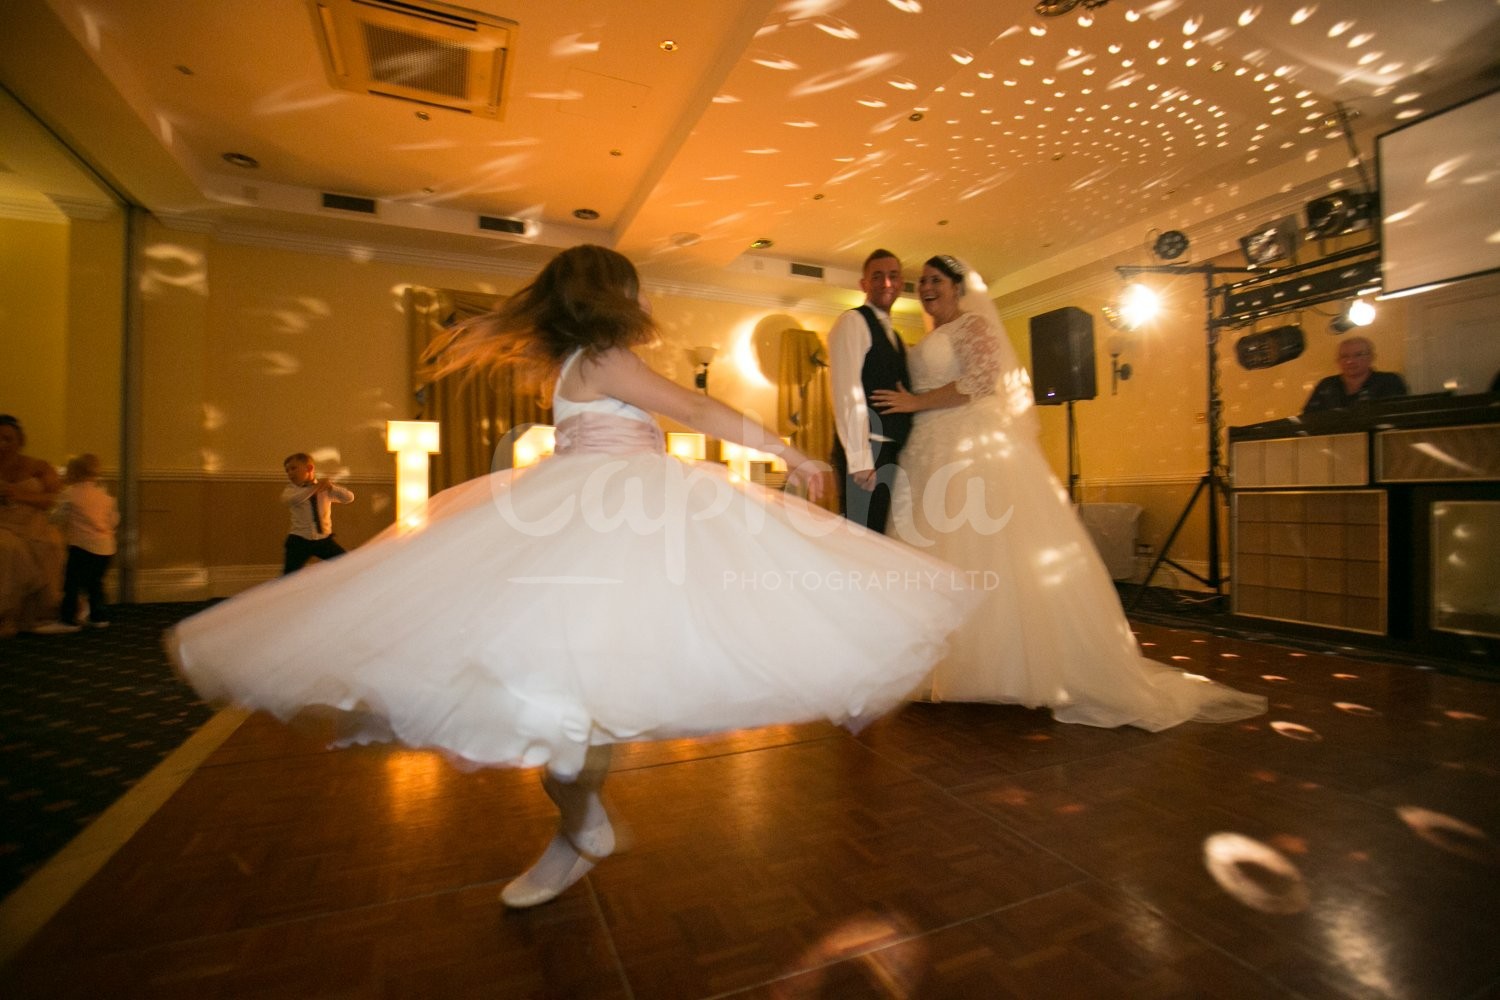 Its just as exciting as Christmas bridesmaid, first dance, photo, yew lodge hotel, disco